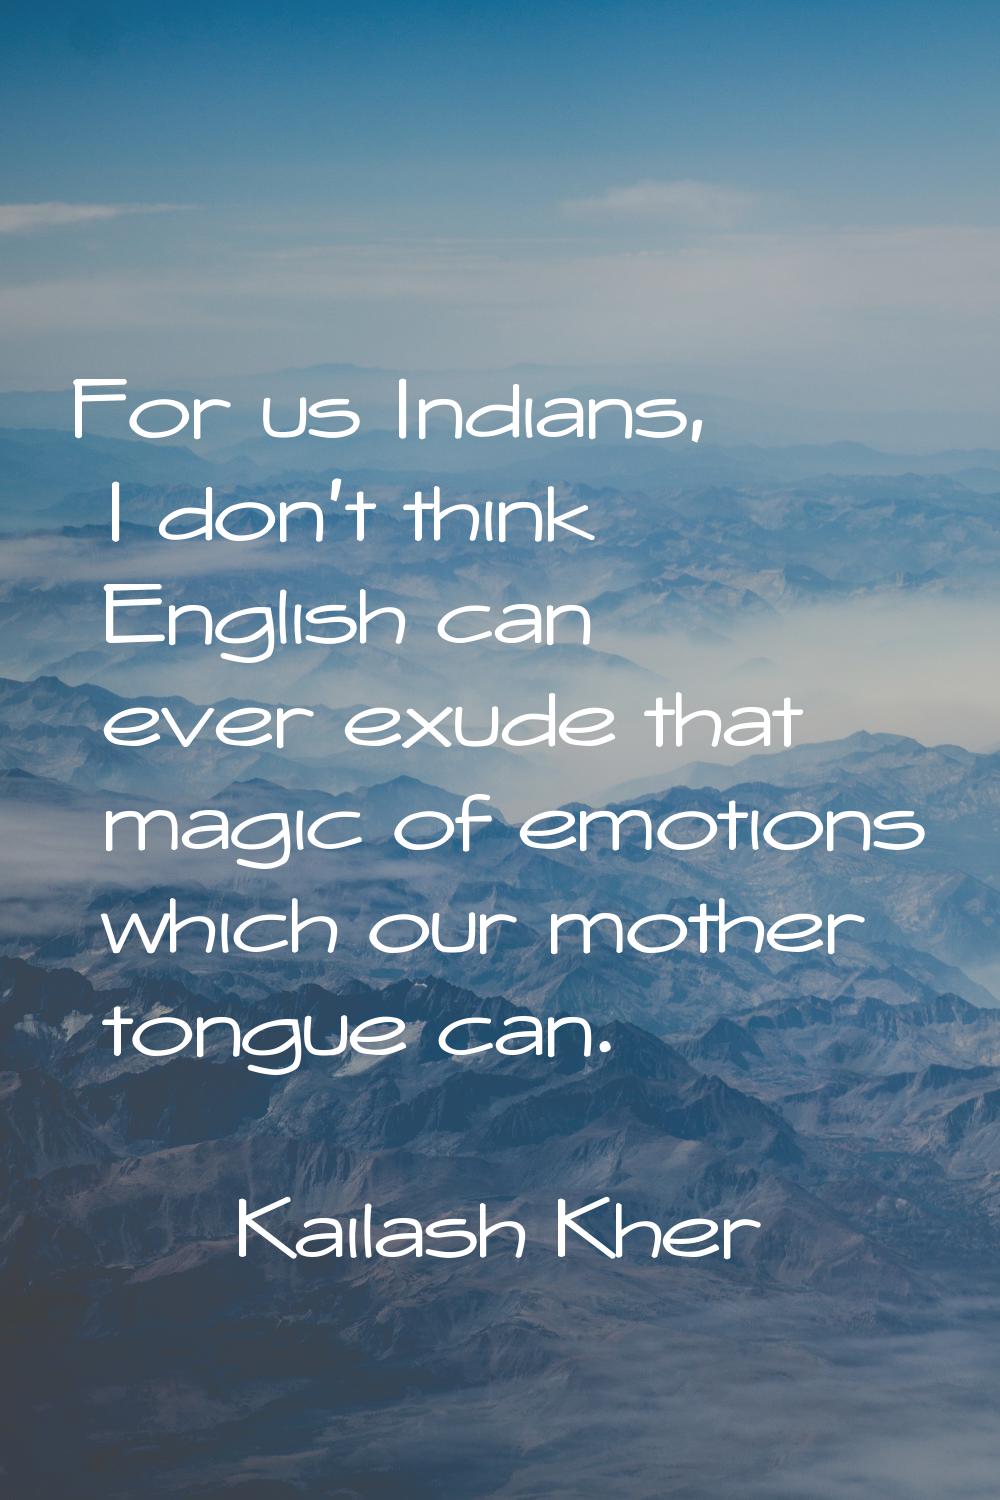 For us Indians, I don't think English can ever exude that magic of emotions which our mother tongue